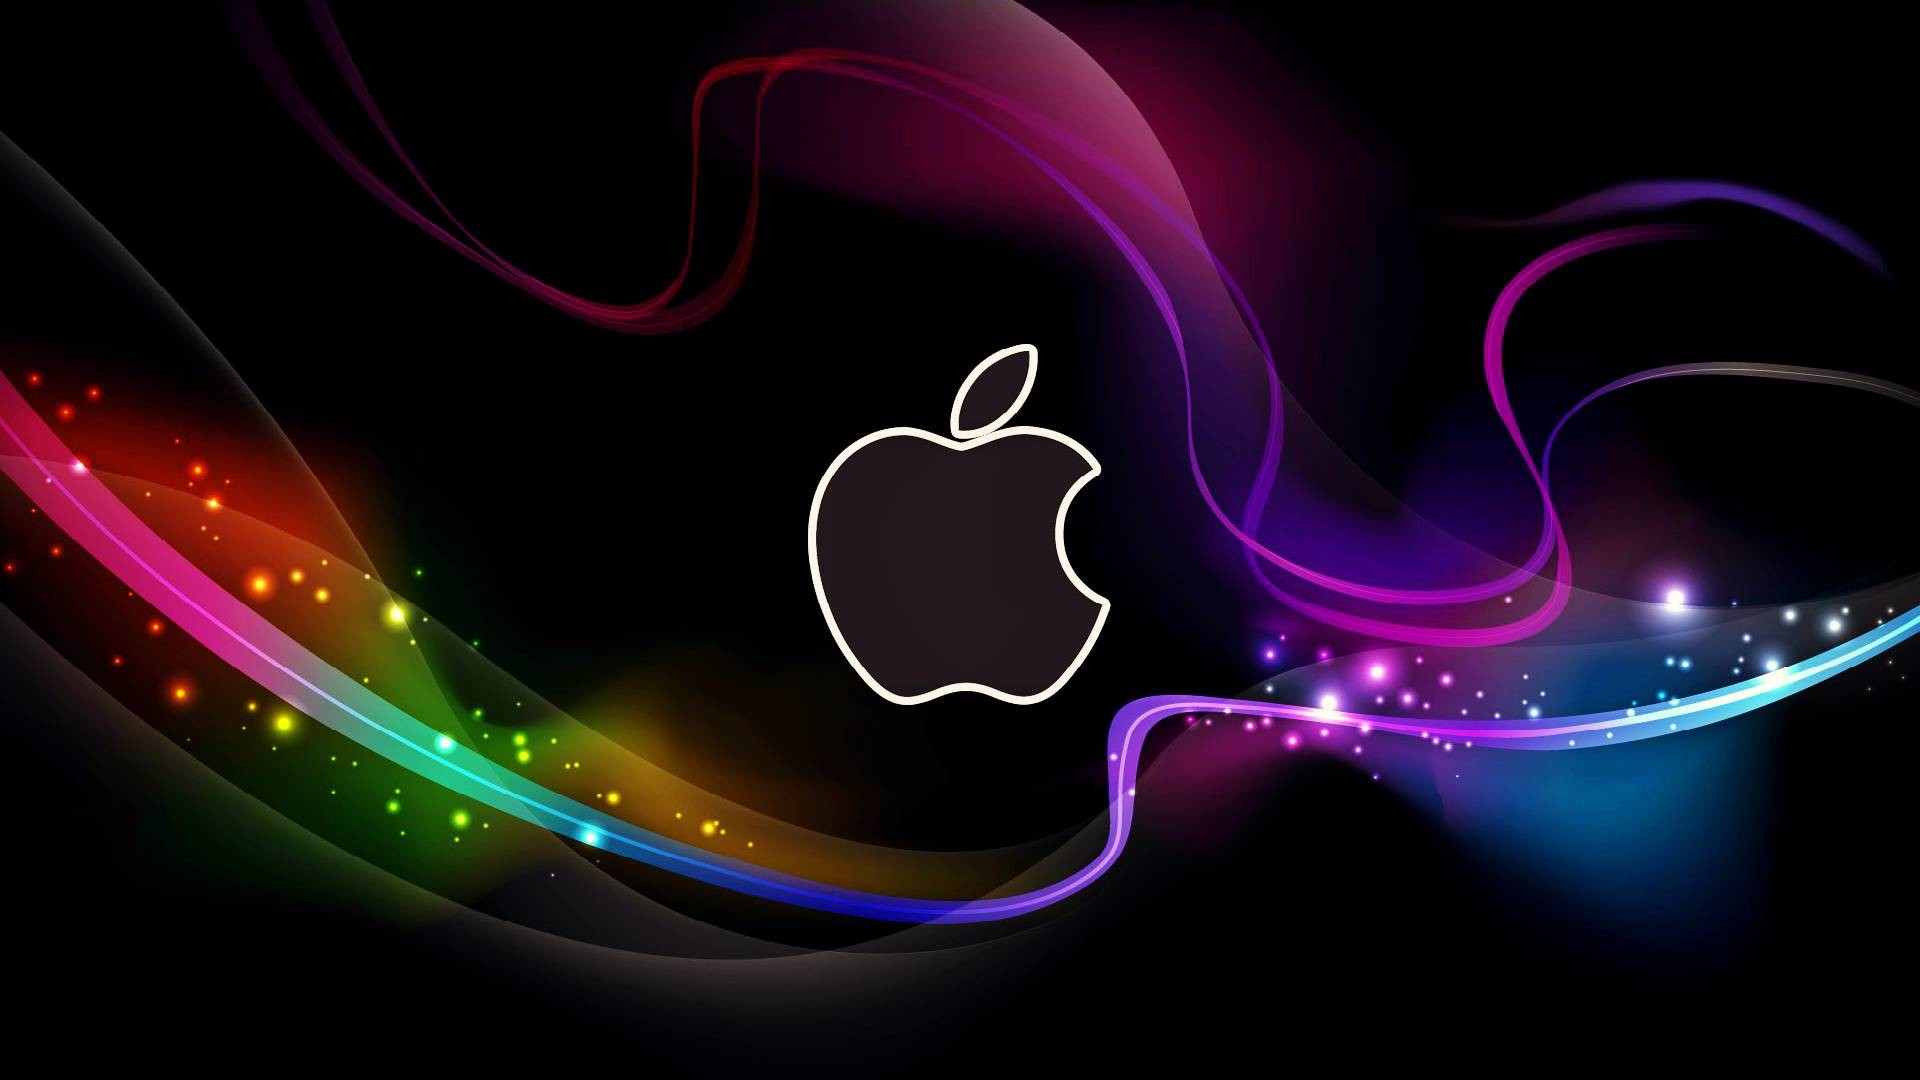 1920x1080 Gallery for - cool apple logo wallpaper